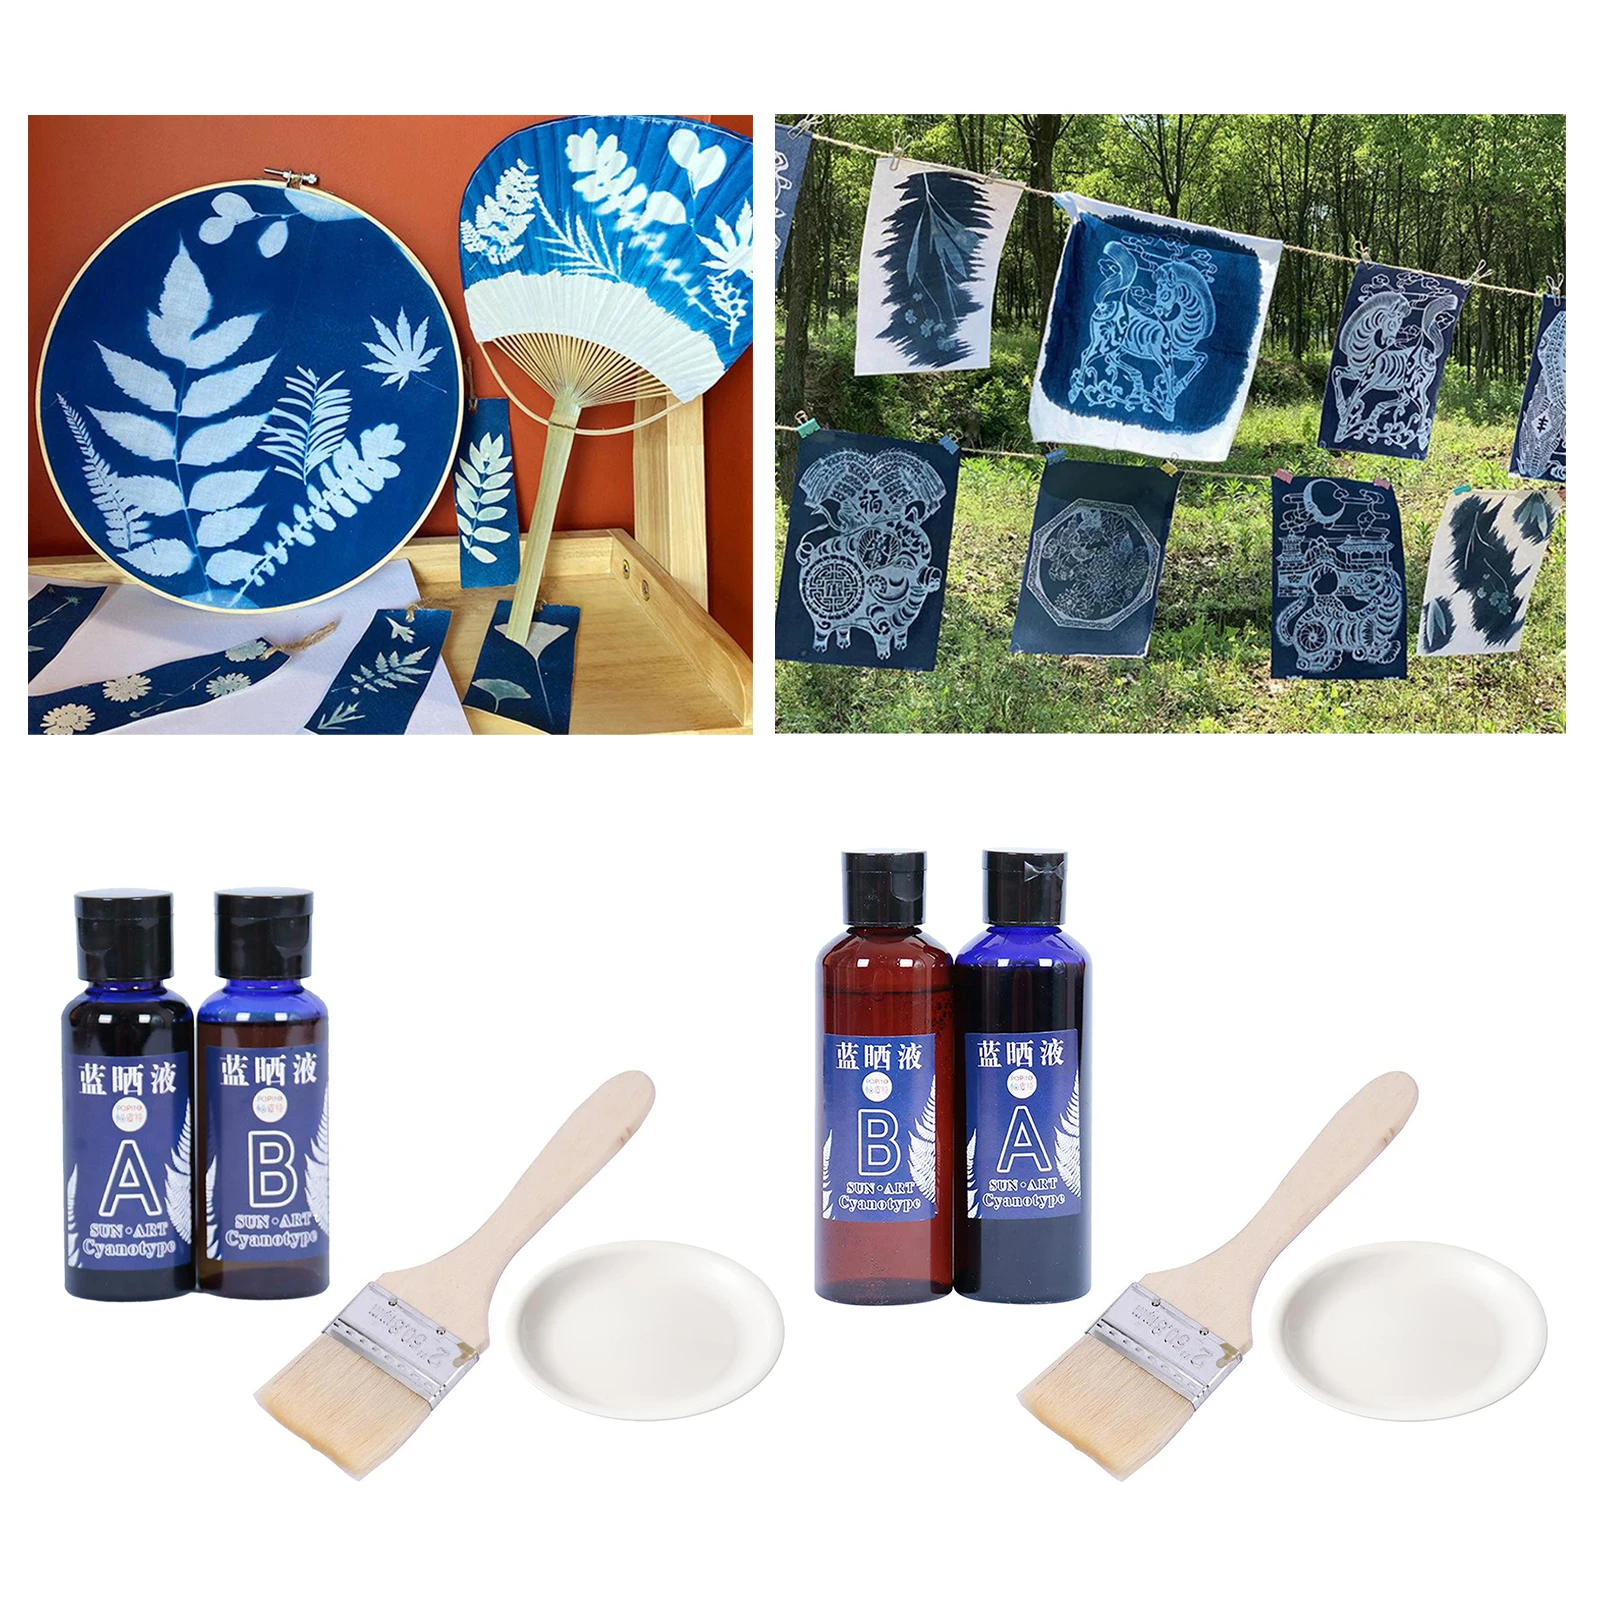 Cyanotype Kit for Sun Print Paper, with Brush Palette Gloves- for Sunography - Make Your Own Light Sensitive Paper, Solar Prints